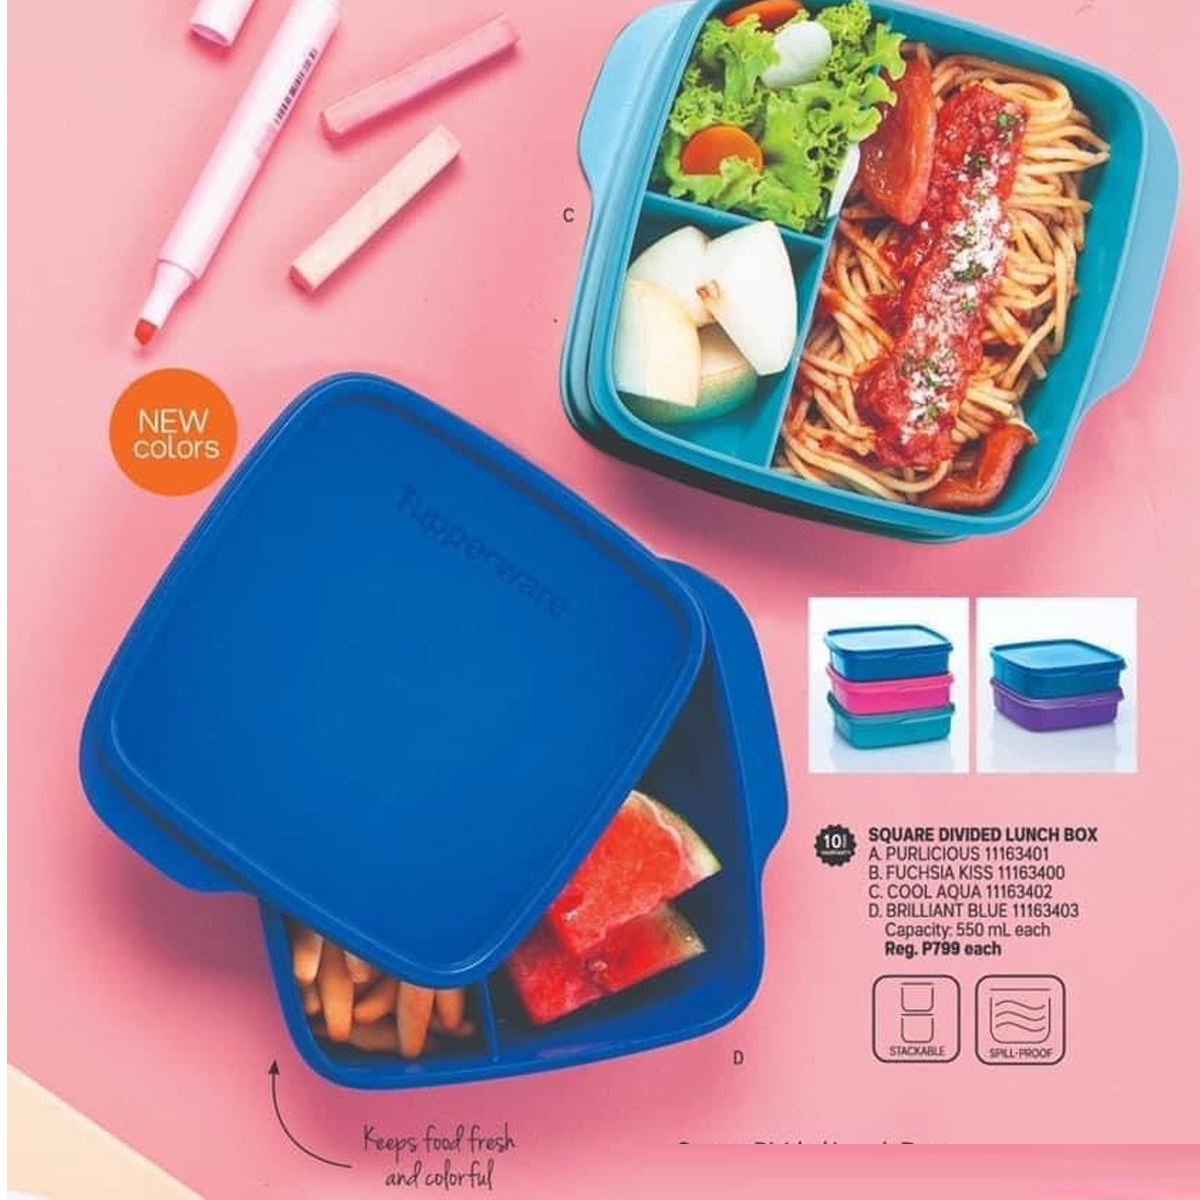 Tupperware Lunch Square Divided Packette Lunch Box Purple Color New